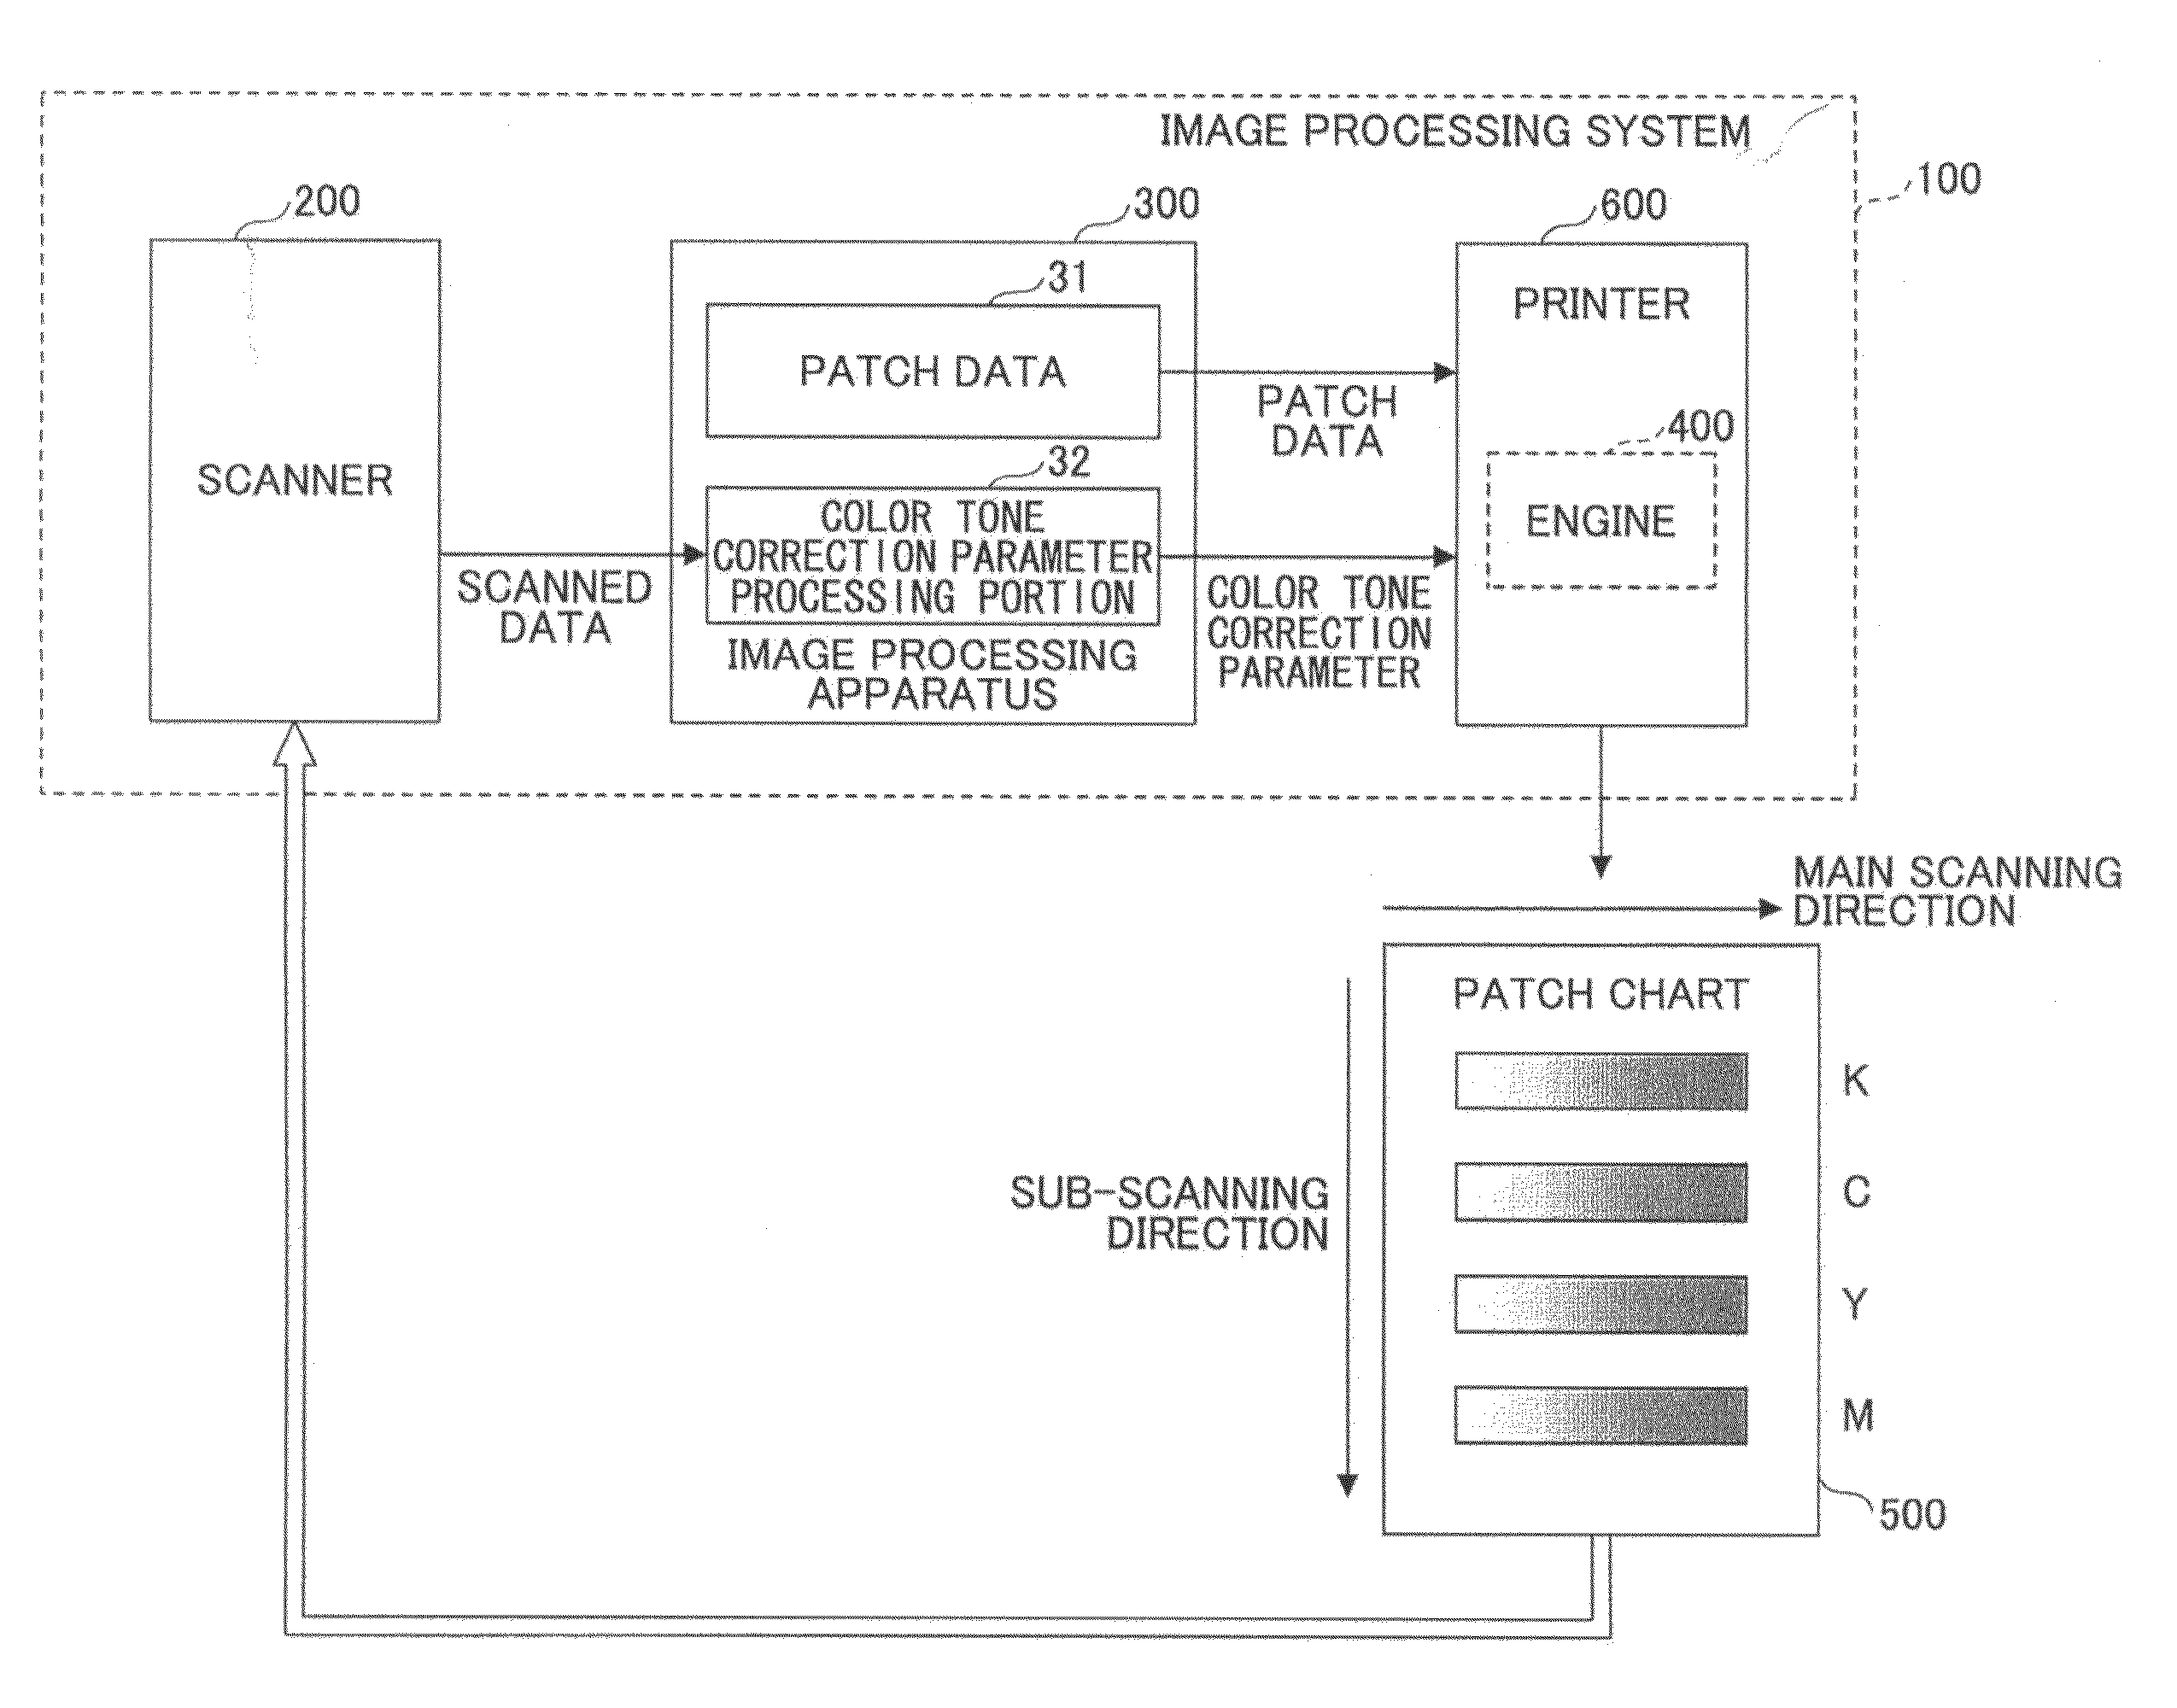 Image processing apparatus, image processing method, and computer- readable recording medium storing image processing program for generating color tone correction parameter